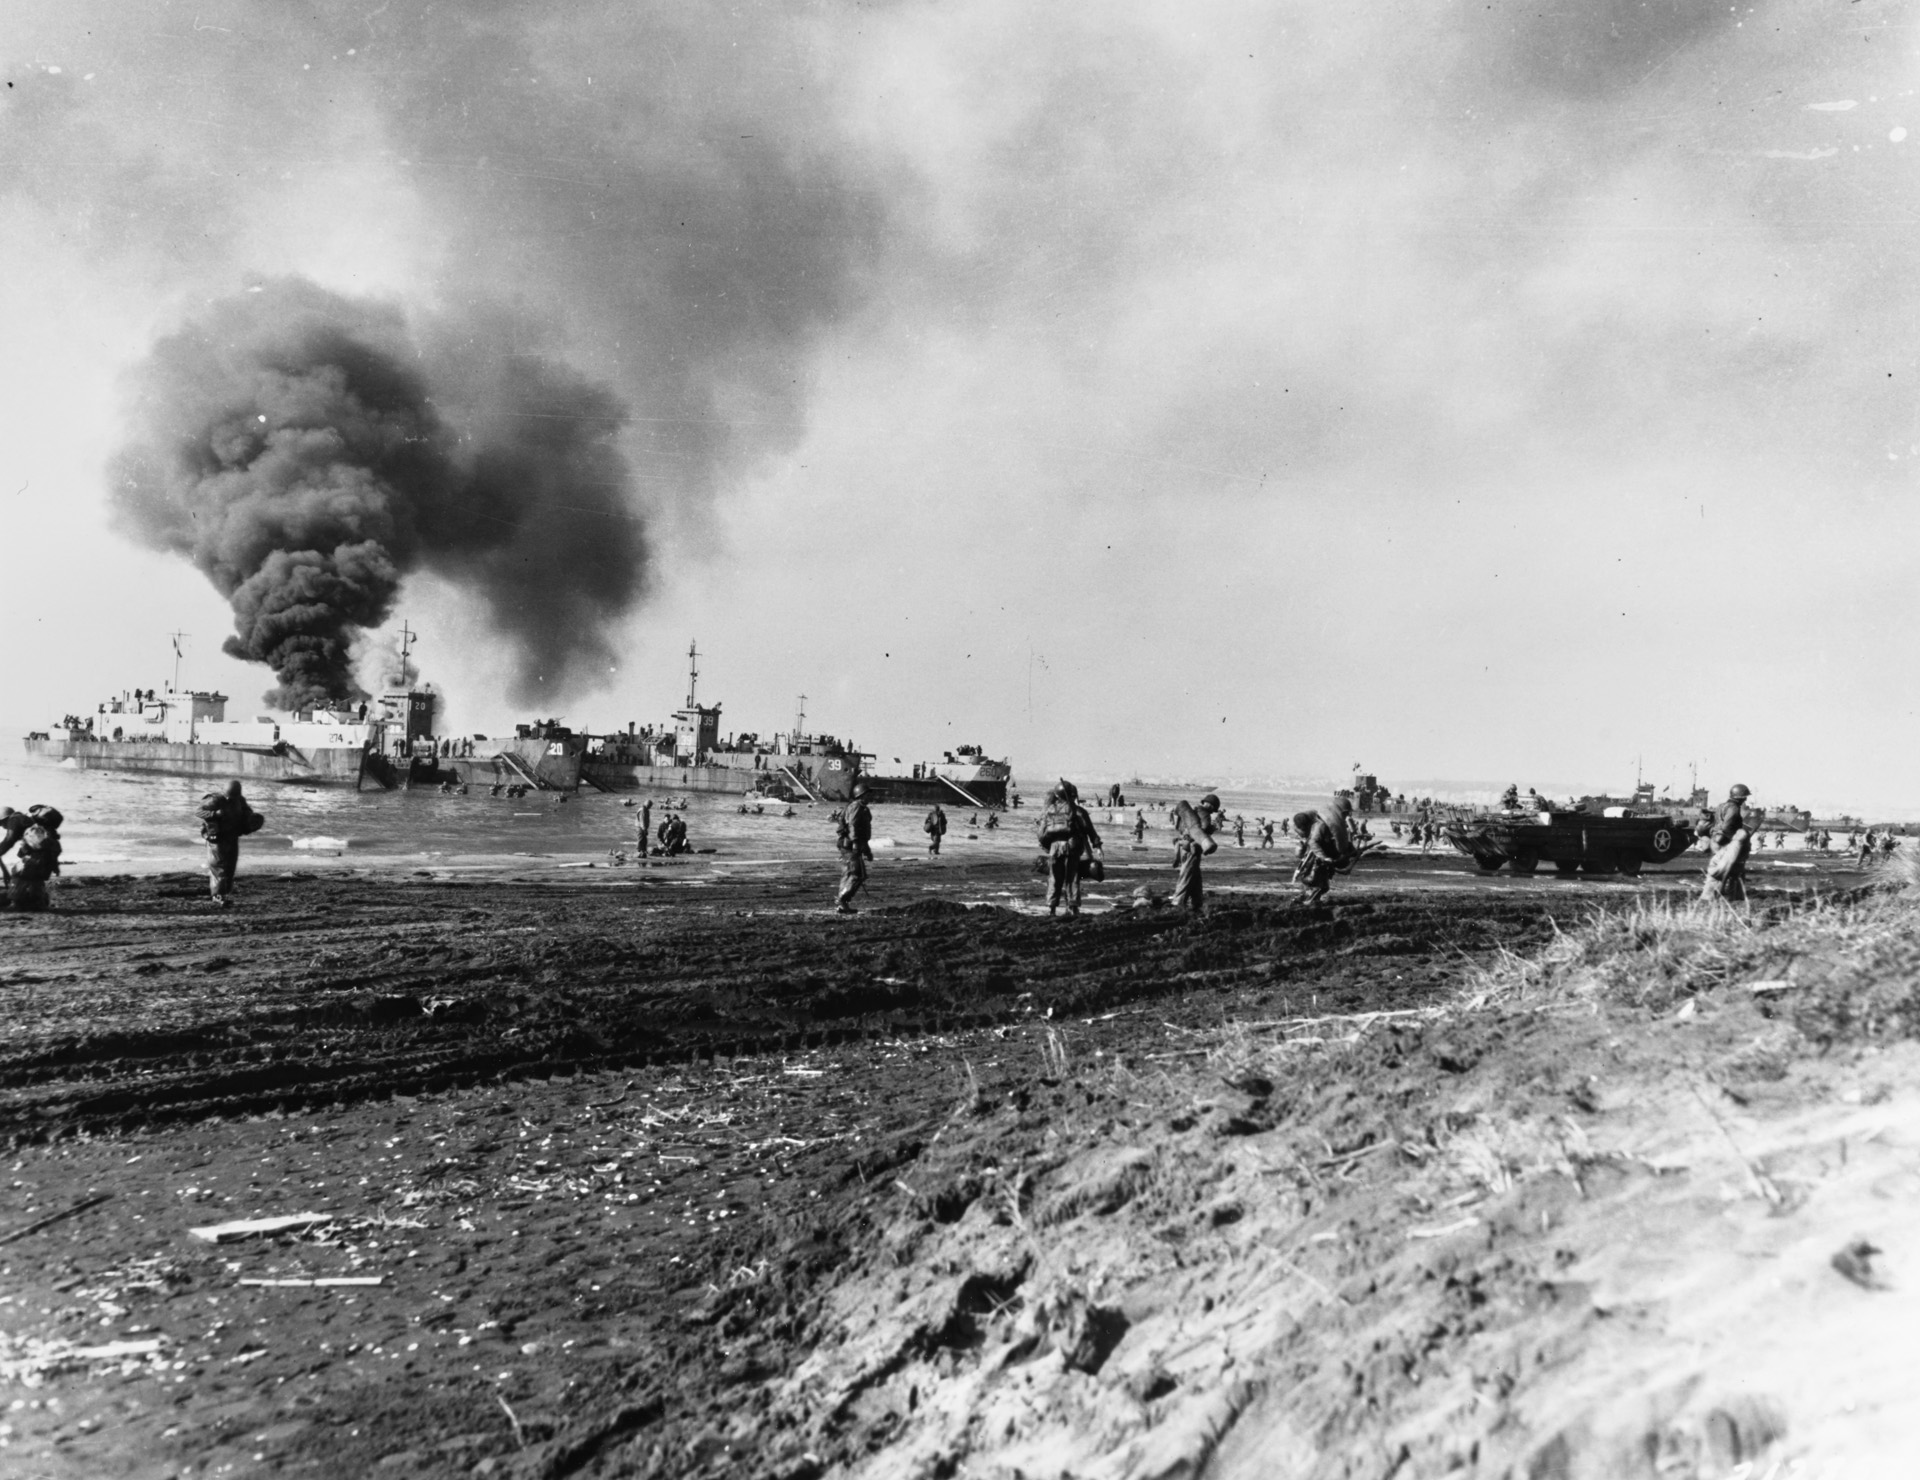 American troops land at Anzio on January 22, 1941, against light enemy resistance. The Luftwaffe did make an appearance and scored a hit on a supply ship, which burns in the background. 